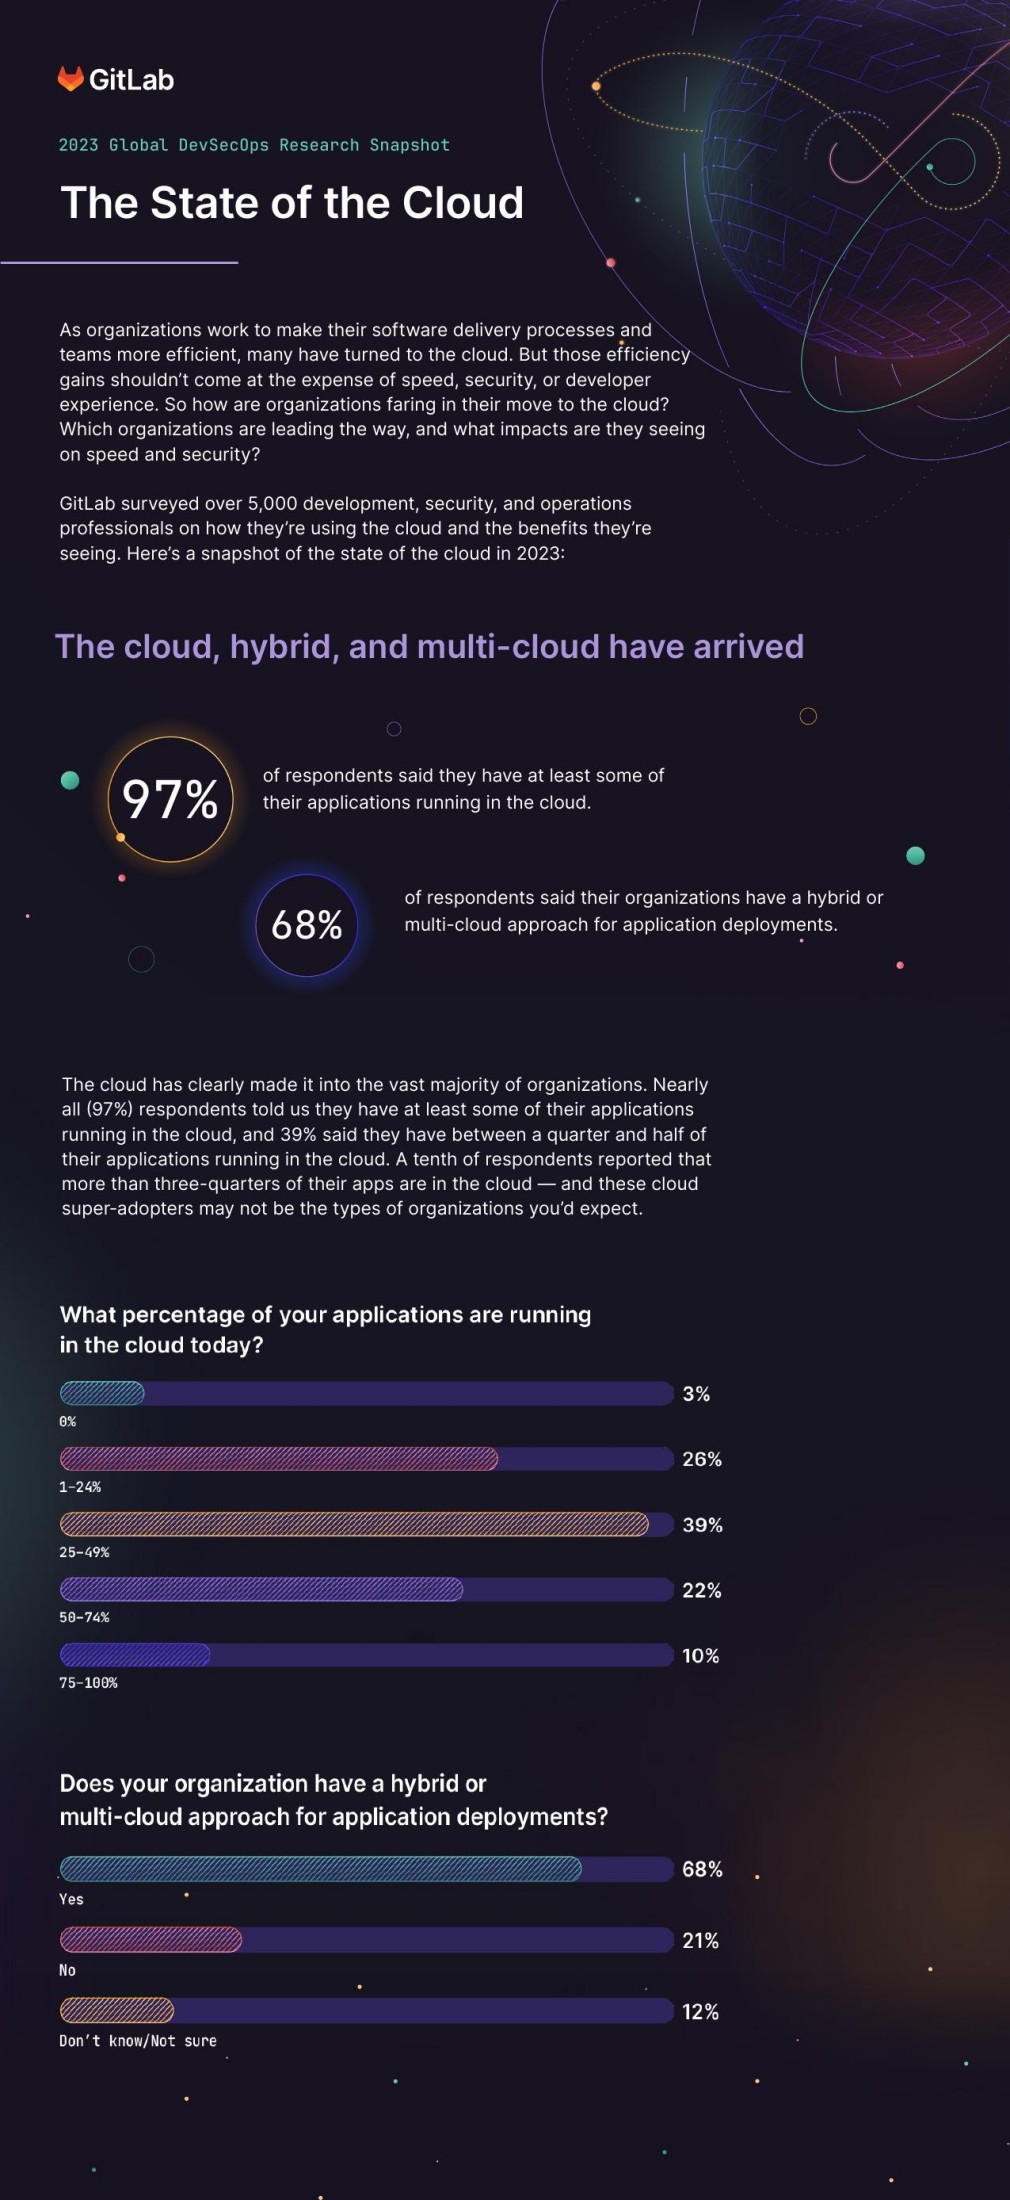 The State of the Cloud